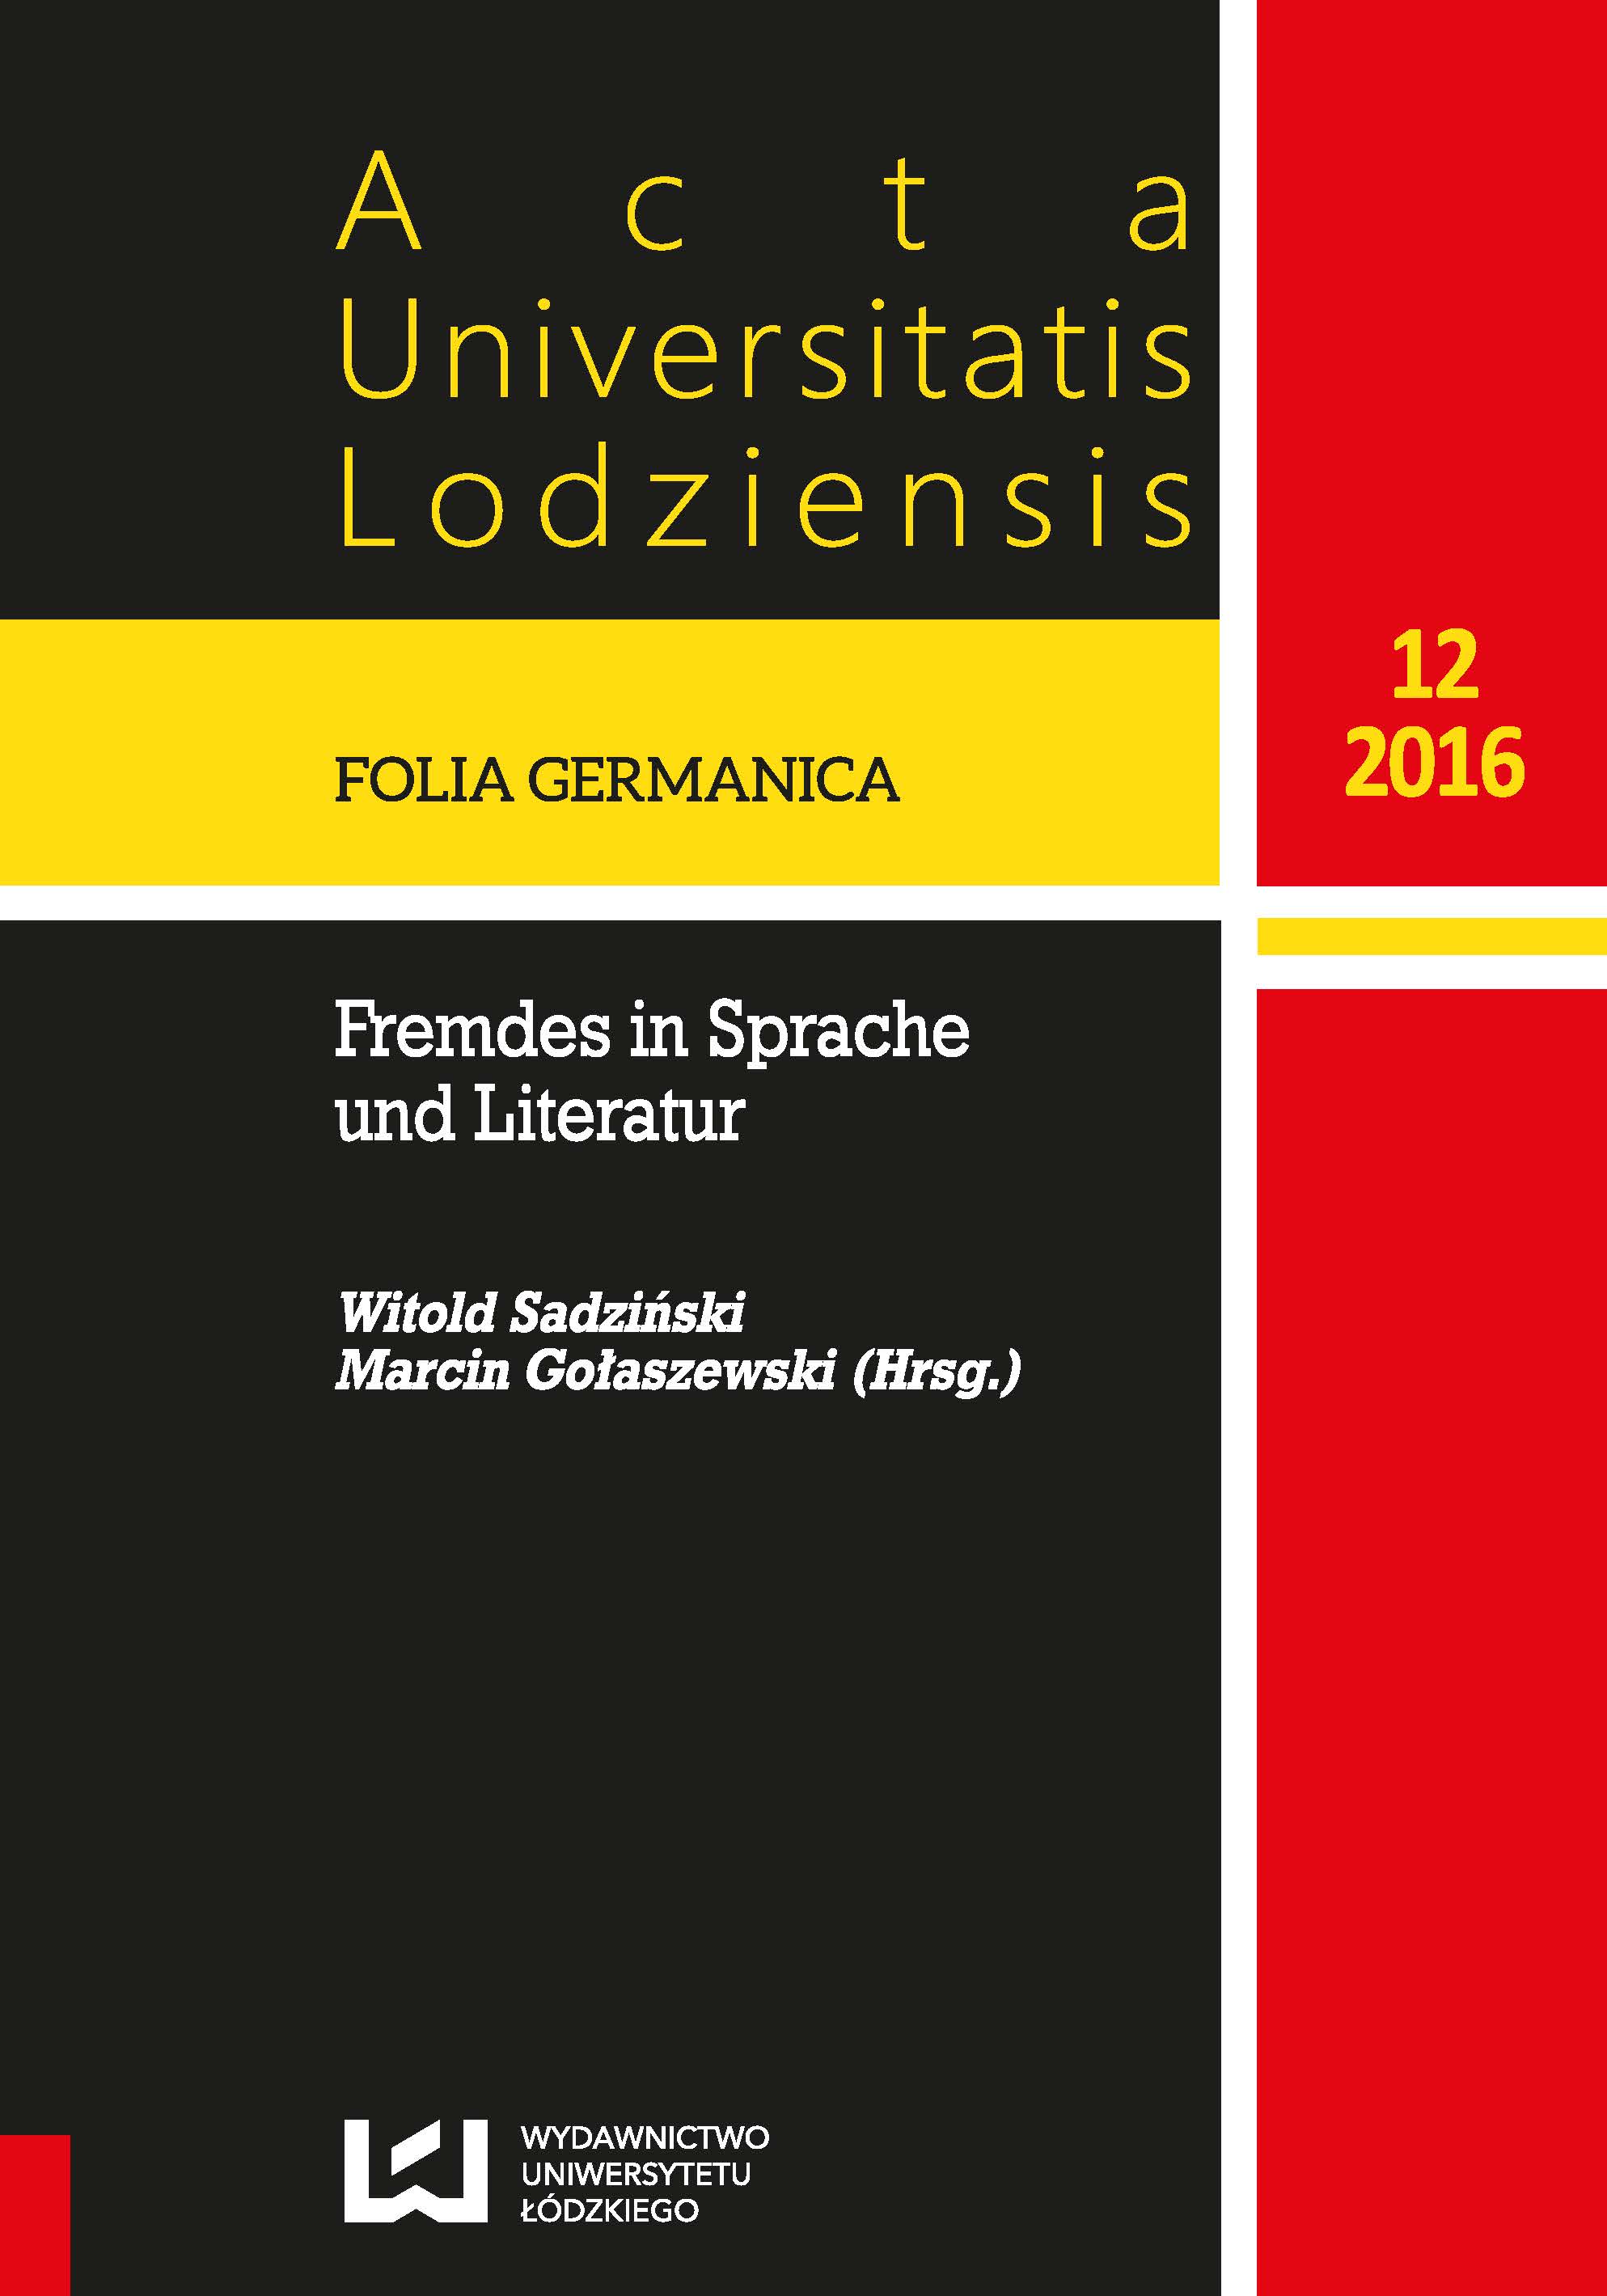 Hetero- and Autostereotypes of Germany in Polish and German Mono- and Bilingual Lexicography Cover Image